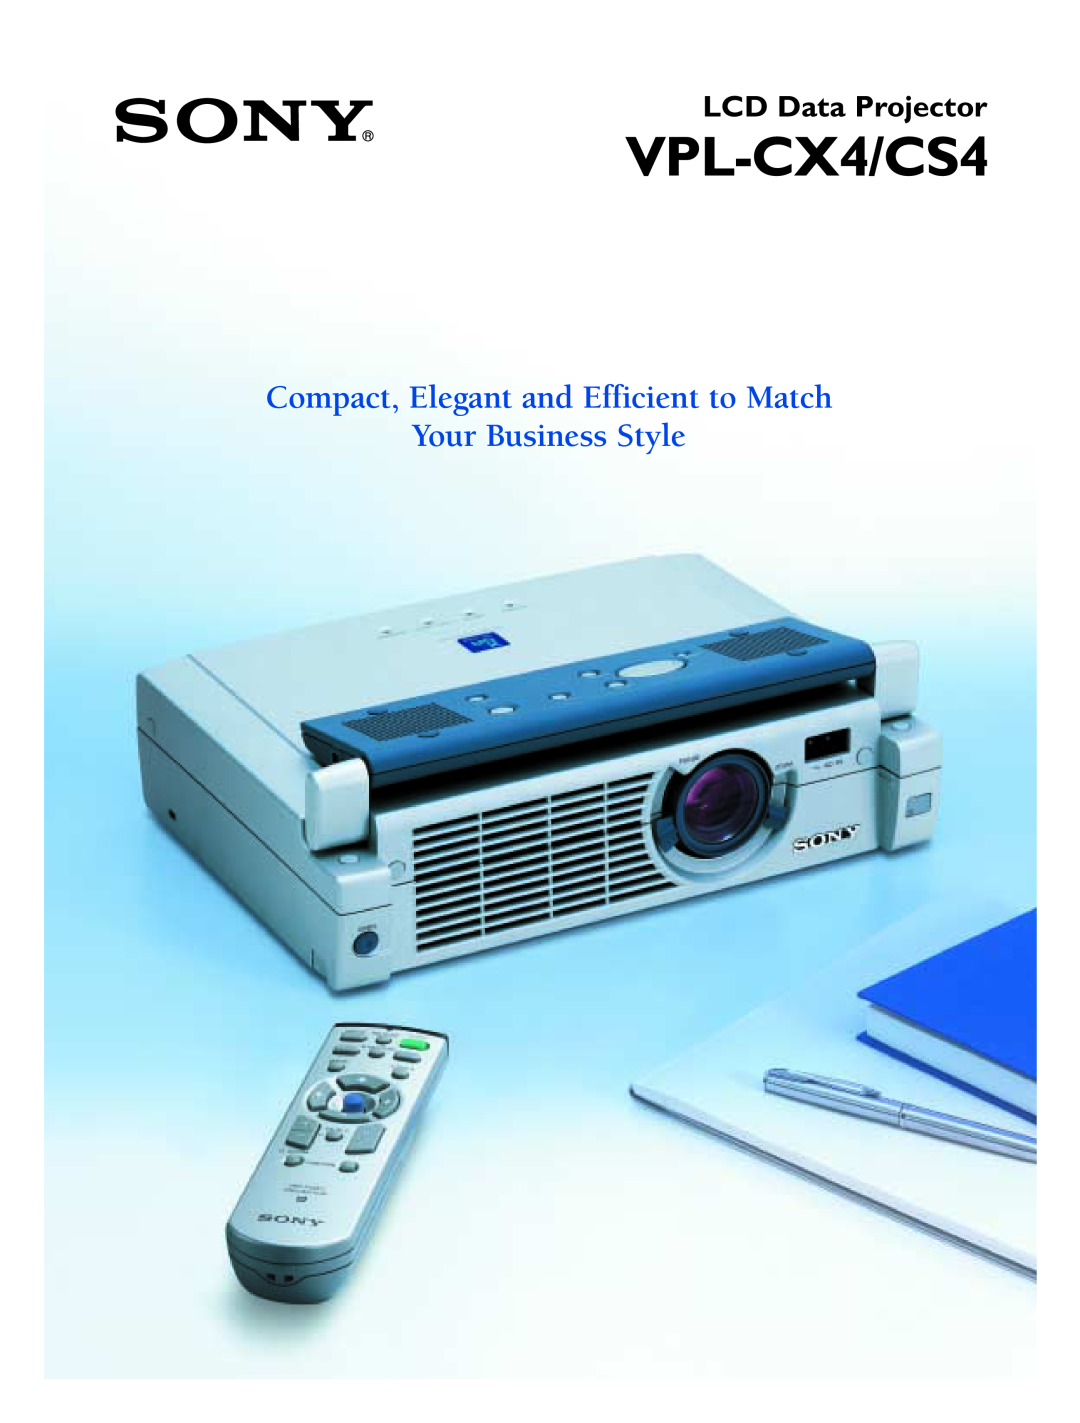 Sony VPL-CX4/CS4 brochure Compact, Elegant and Efficient to Match Your Business Style, LCD Data Projector 